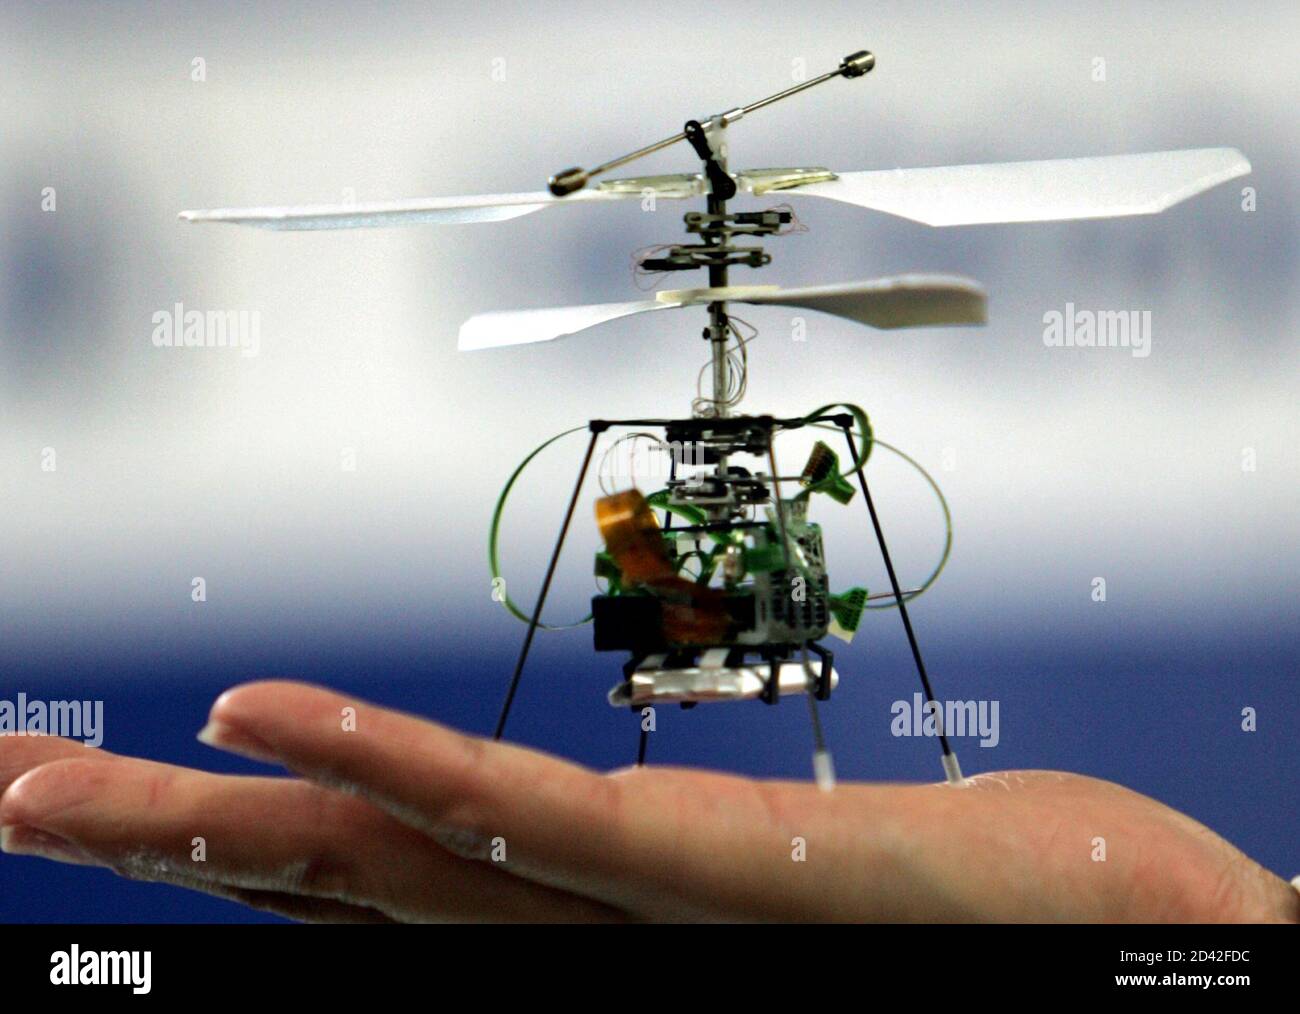 Seiko Epson Corporation's advanced model of the "world's lightest micro-flying  robot" prototype iFR-II is unveiled at a test demonstration in Tokyo August  18, 2004. Featuring Bluetooth wireless control, independent flight, and the  "